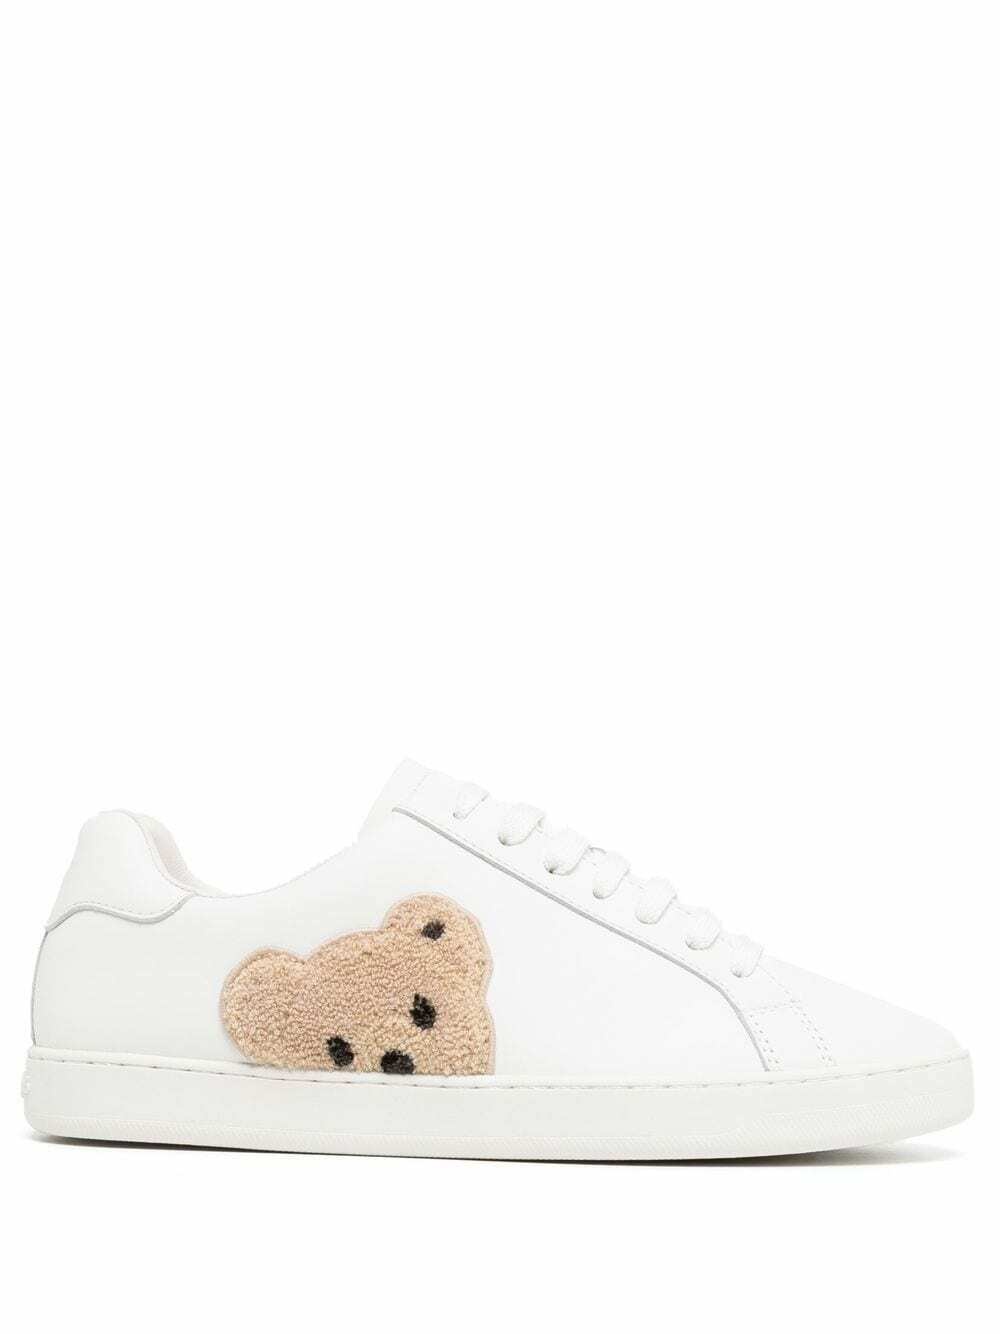 PALM ANGELS - Teddy Bear Leather Sneakers Palm Angels